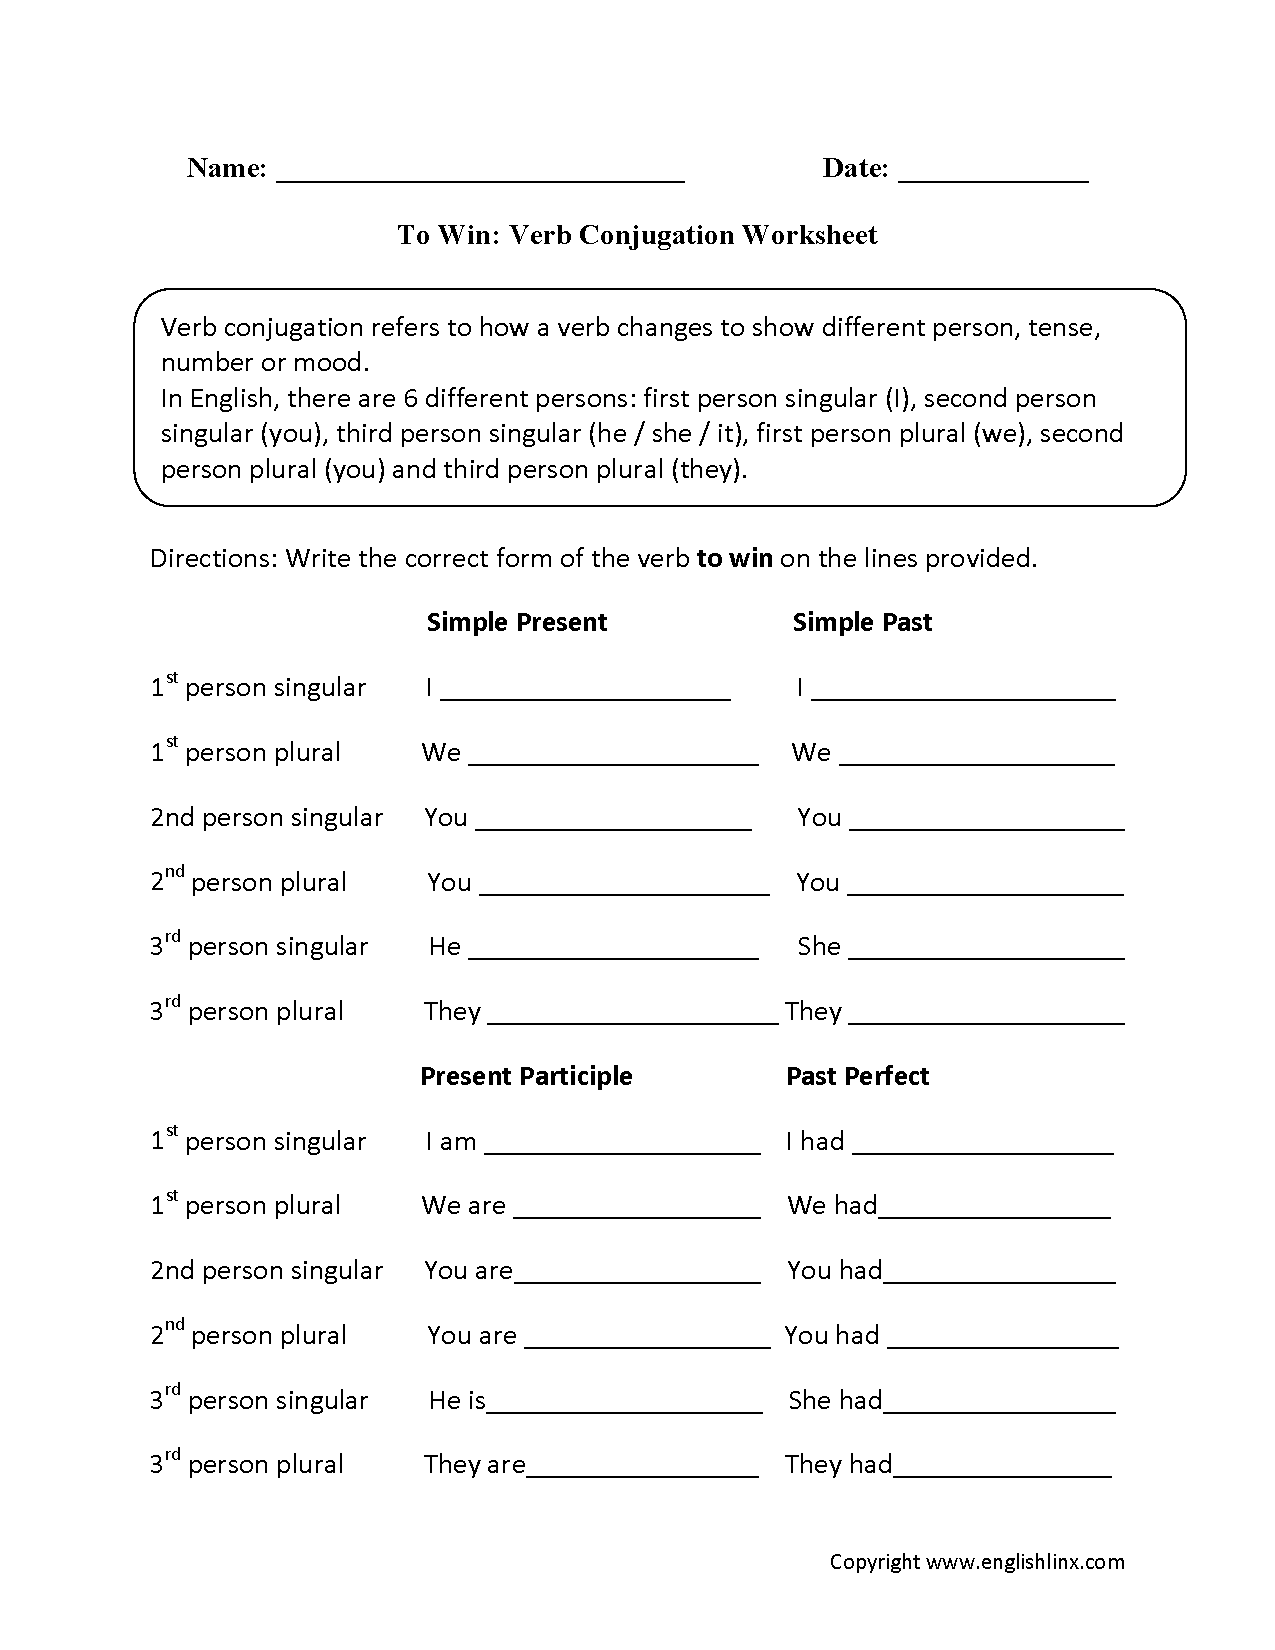 To Win Verb Conjugation Worksheets